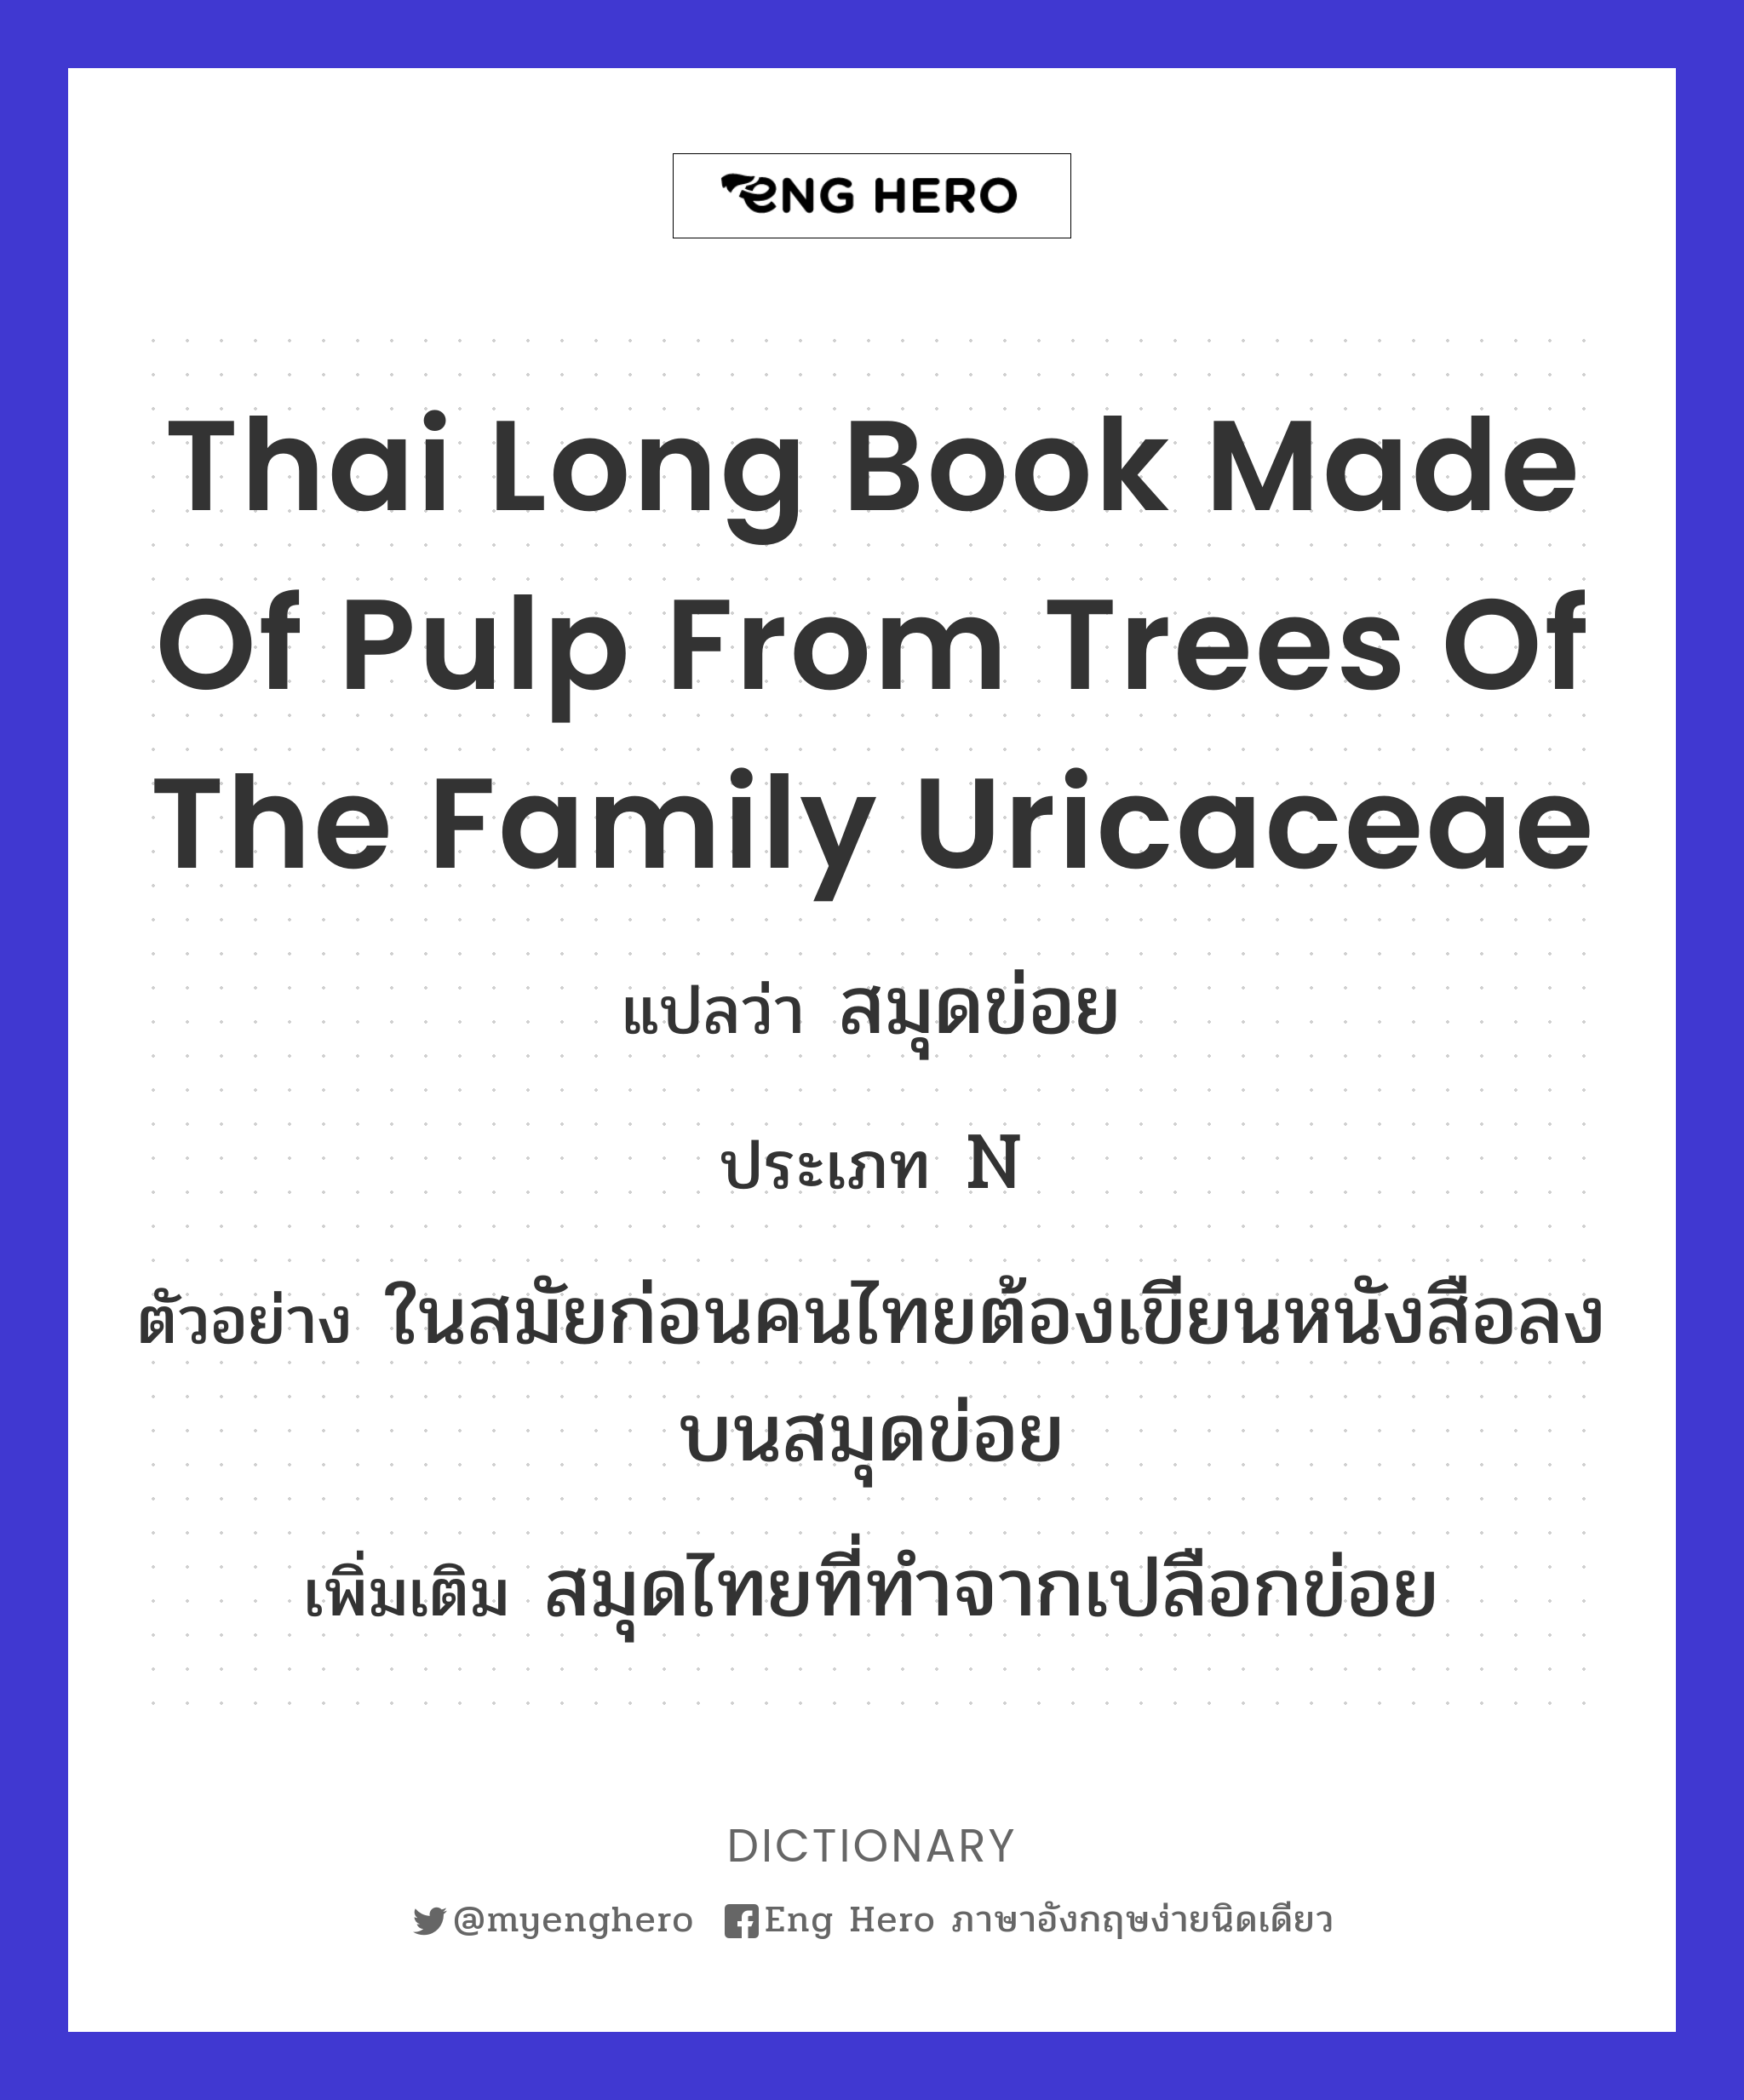 Thai long book made of pulp from trees of the family Uricaceae